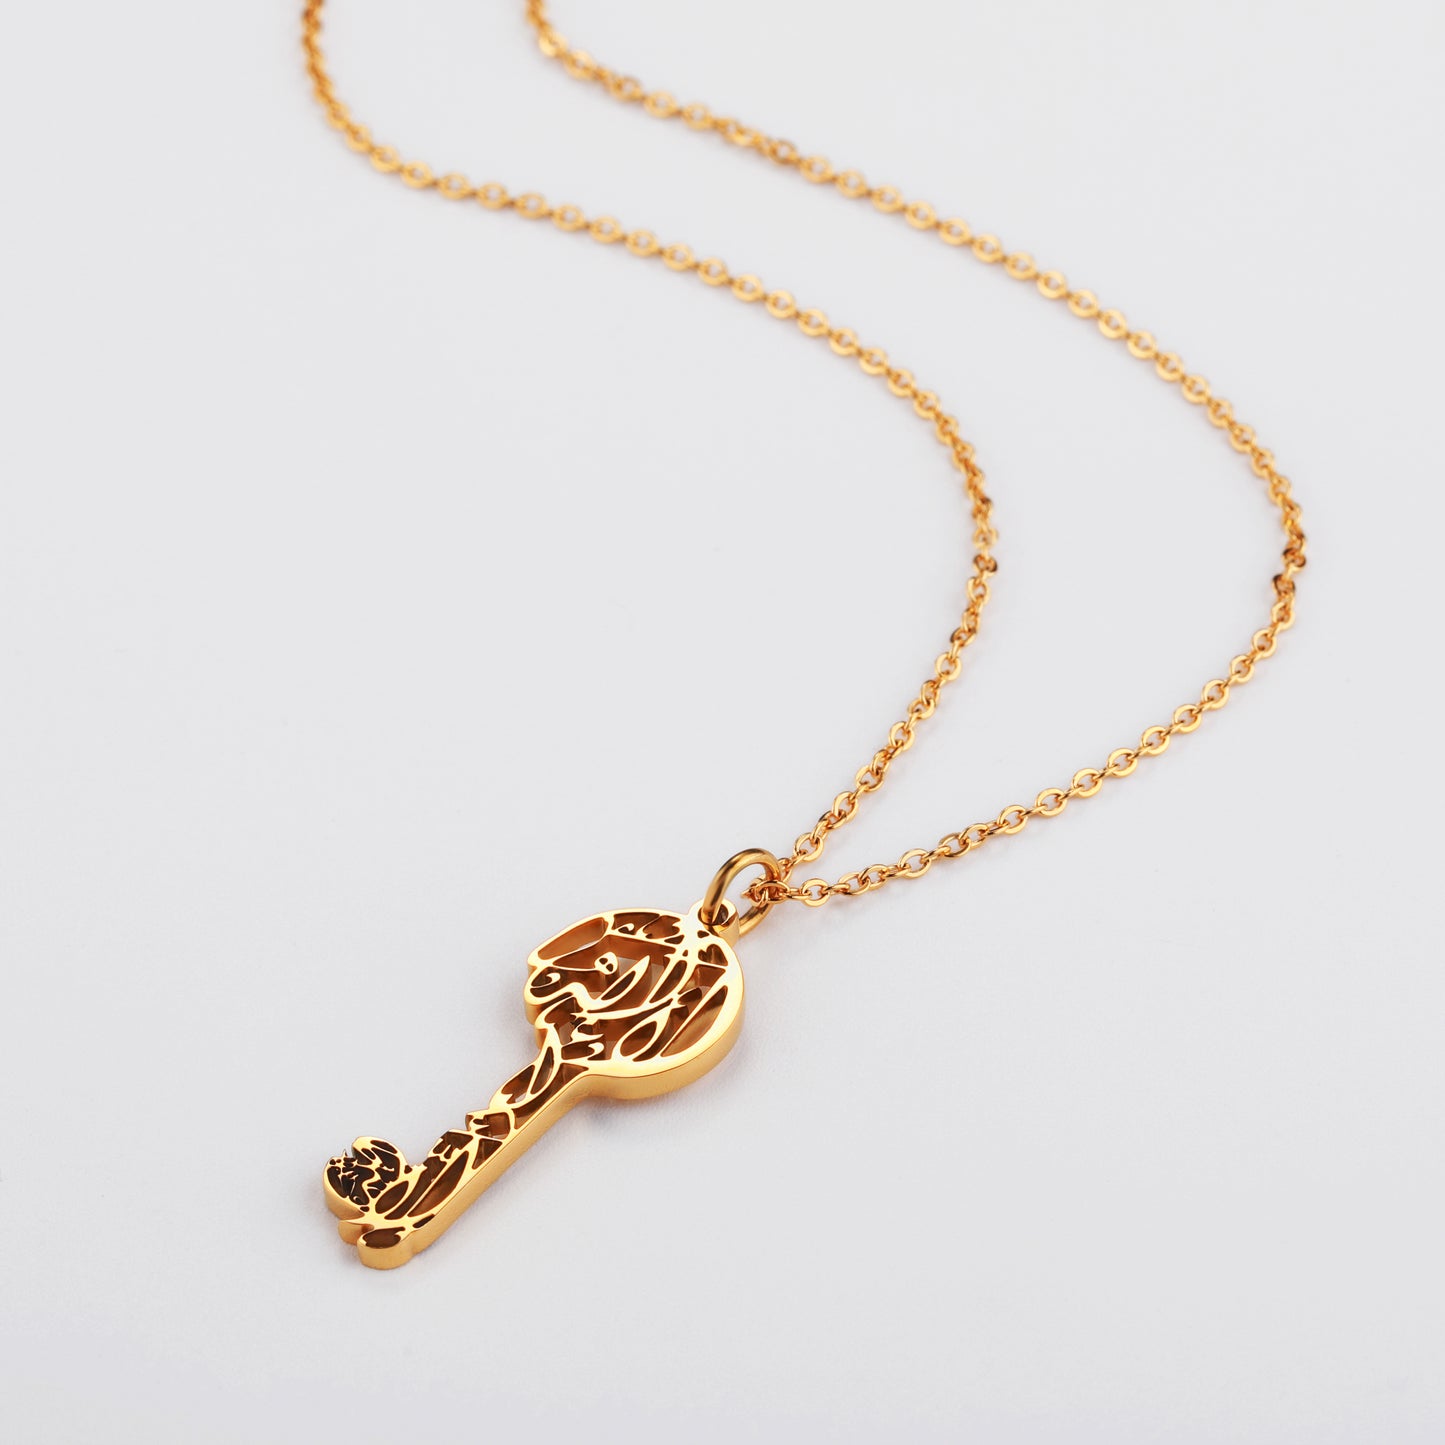 Darjali Jewelry There is no god but God Necklace 18K Gold 